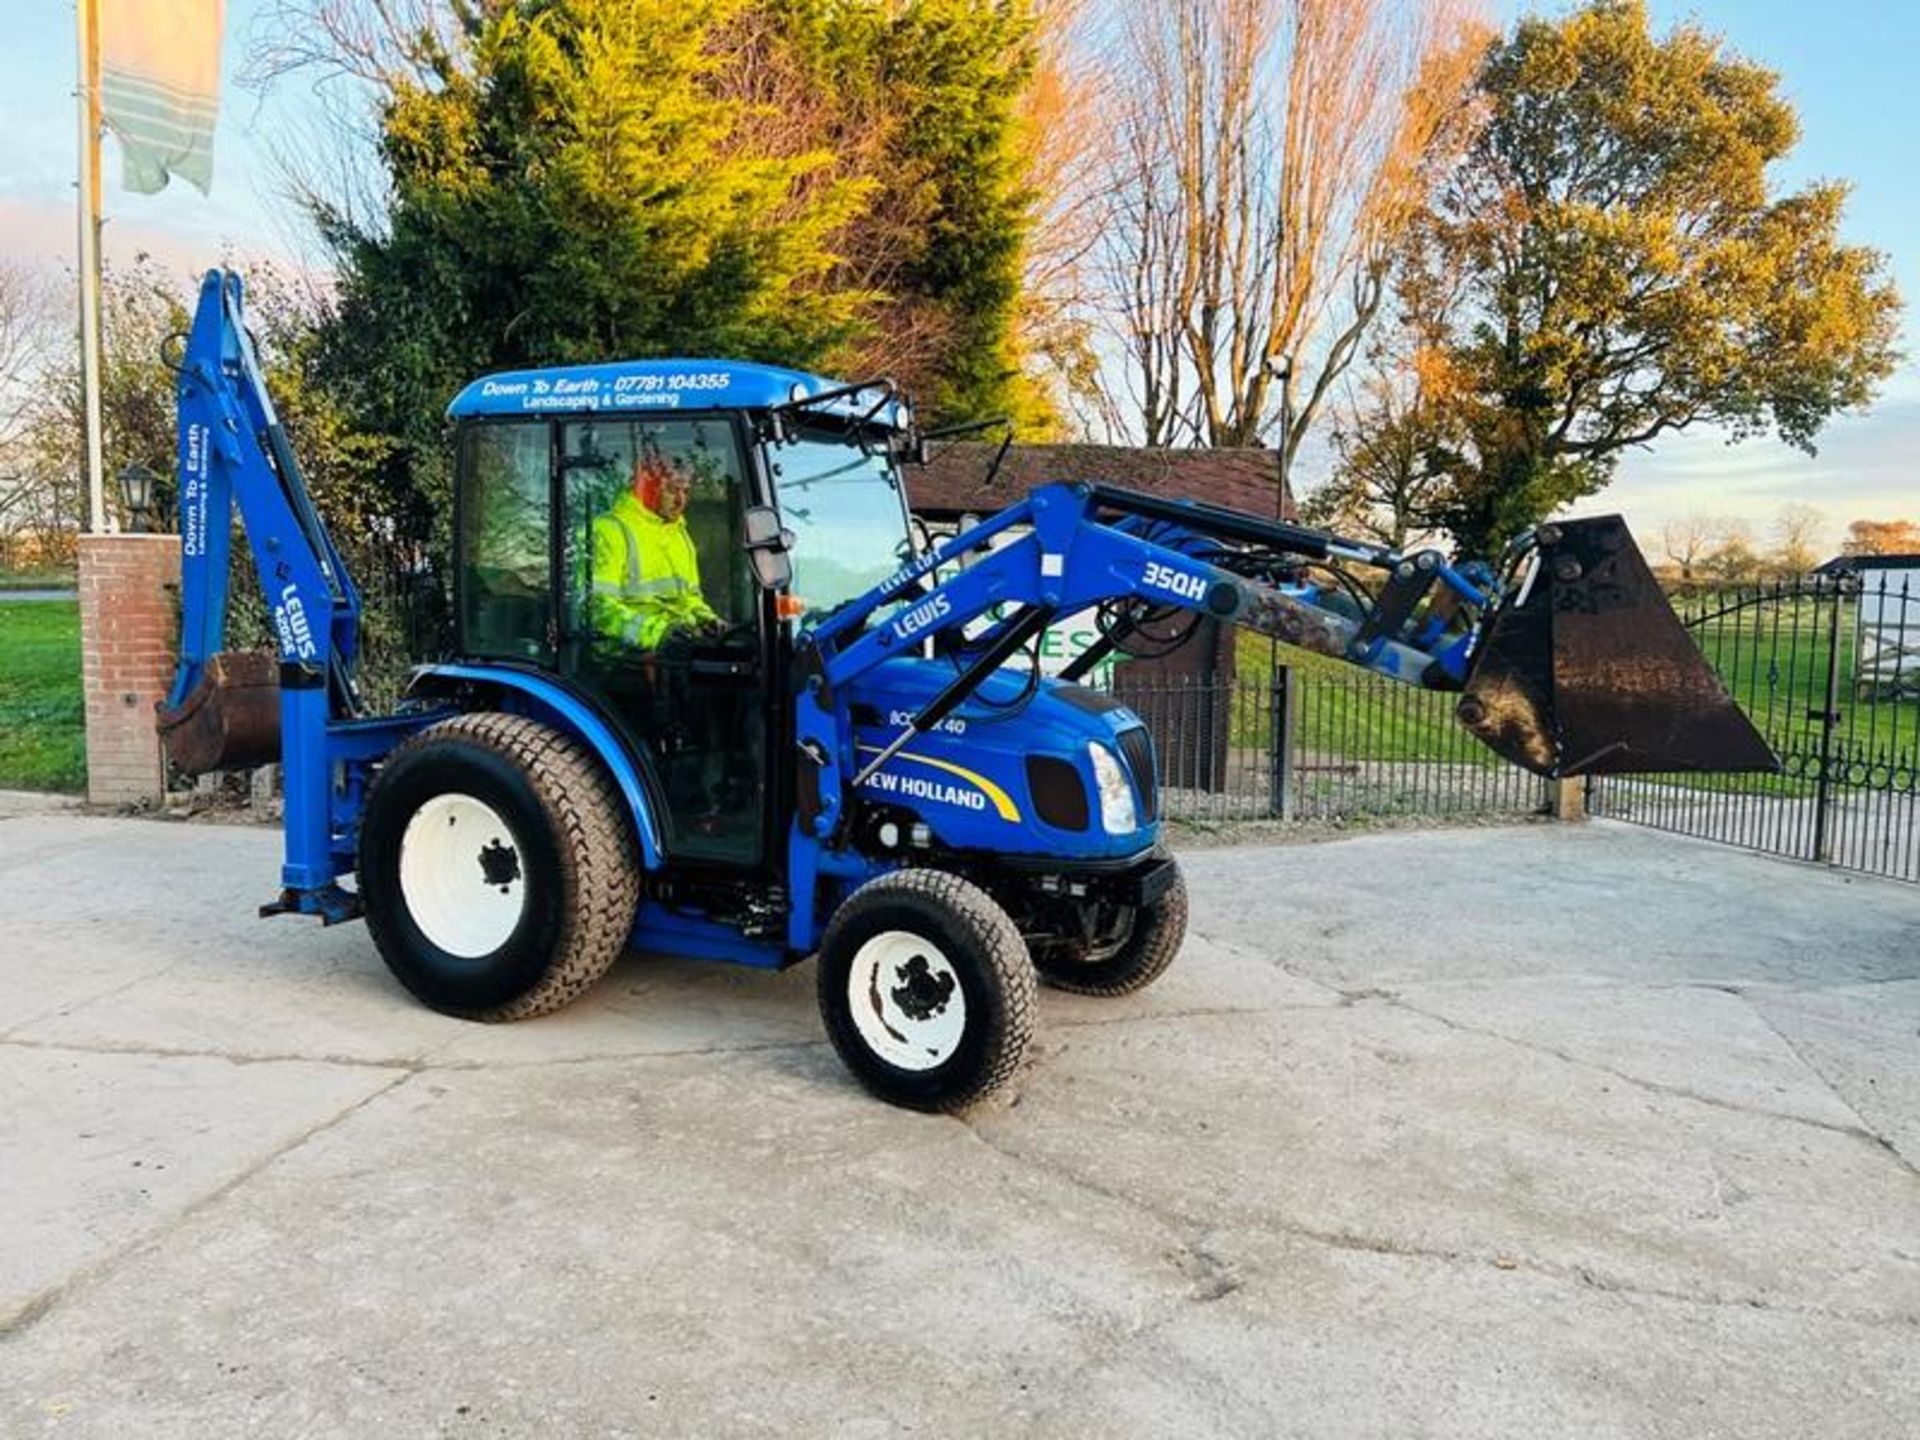 NEW HOLLAND BOOMER 40 4WD TRACTOR *YEAR 2014, ONLY 737 HRS* C/W LOADER & BACK TRACTOR - Image 14 of 19